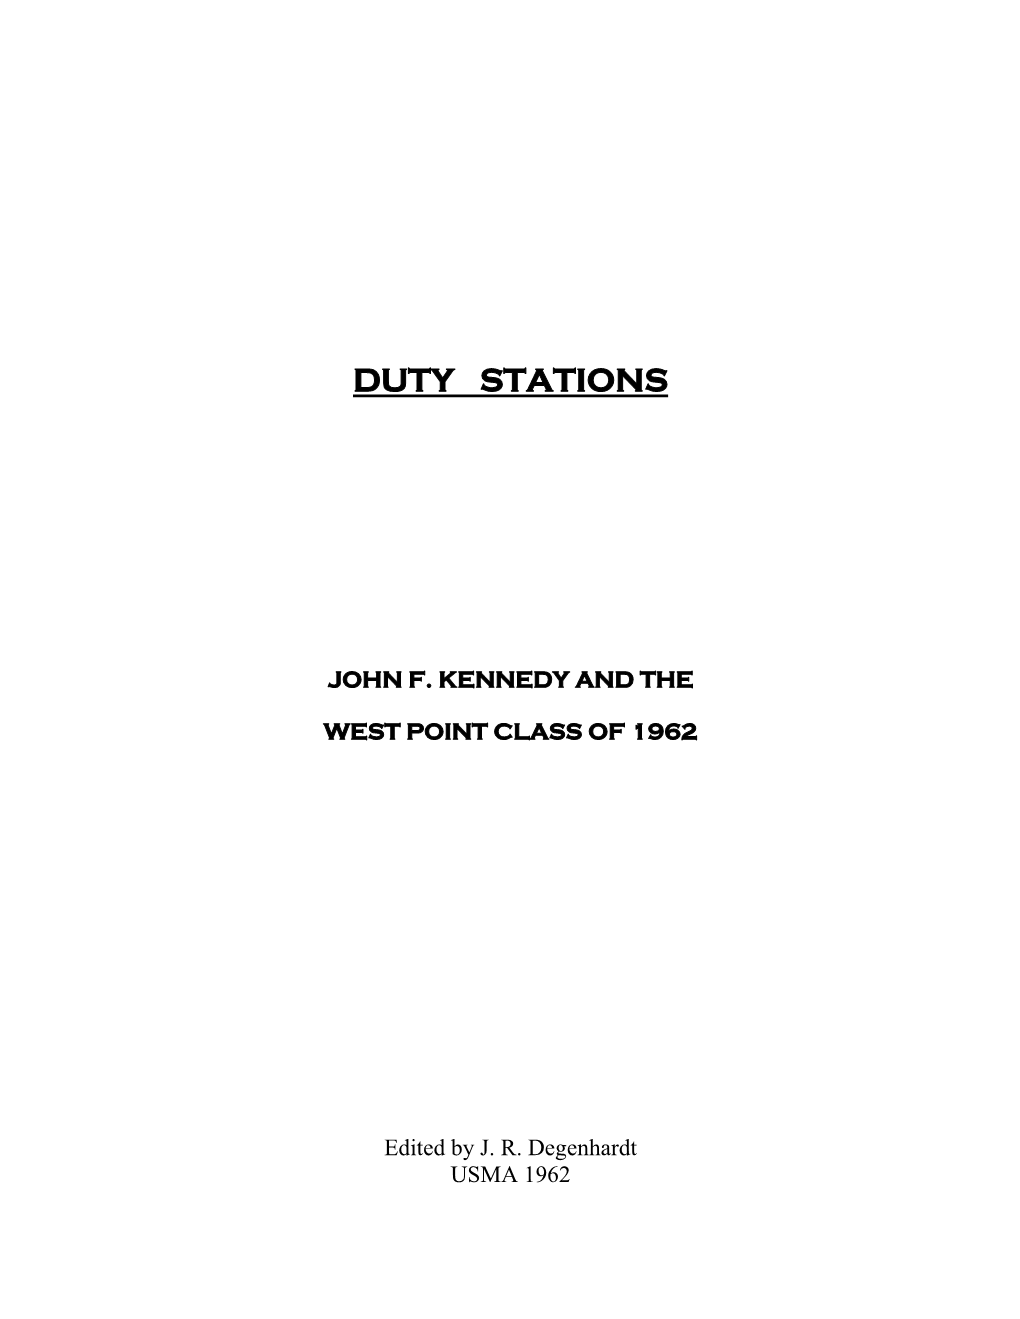 DUTY STATIONS John F Kennedy and the West Point Class of 1962